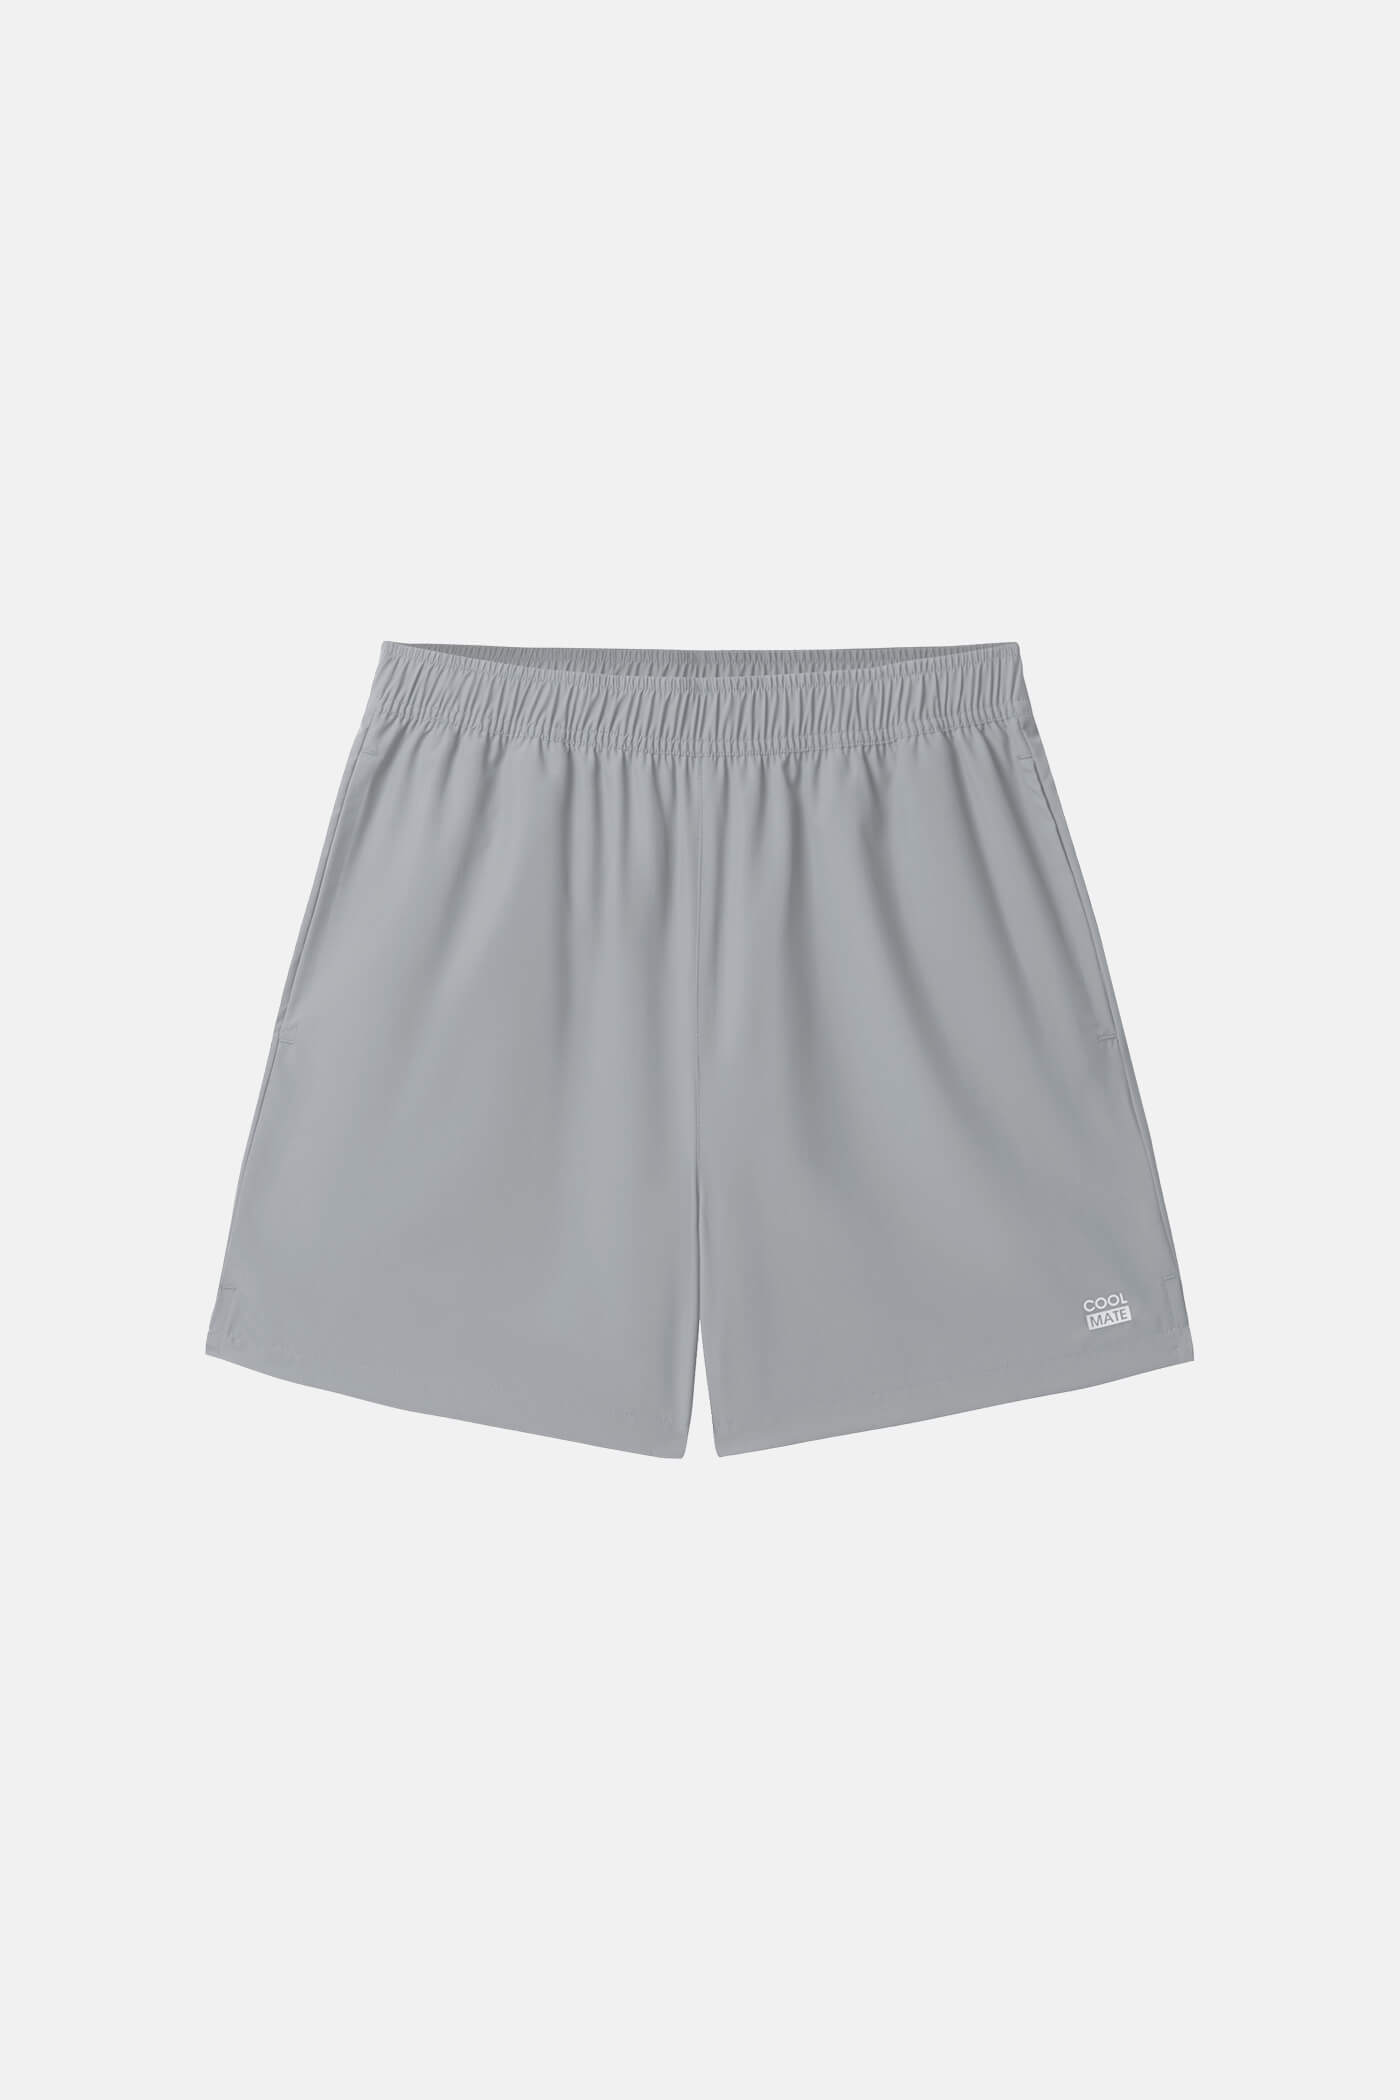 Shorts thể thao 5" New Ultra 